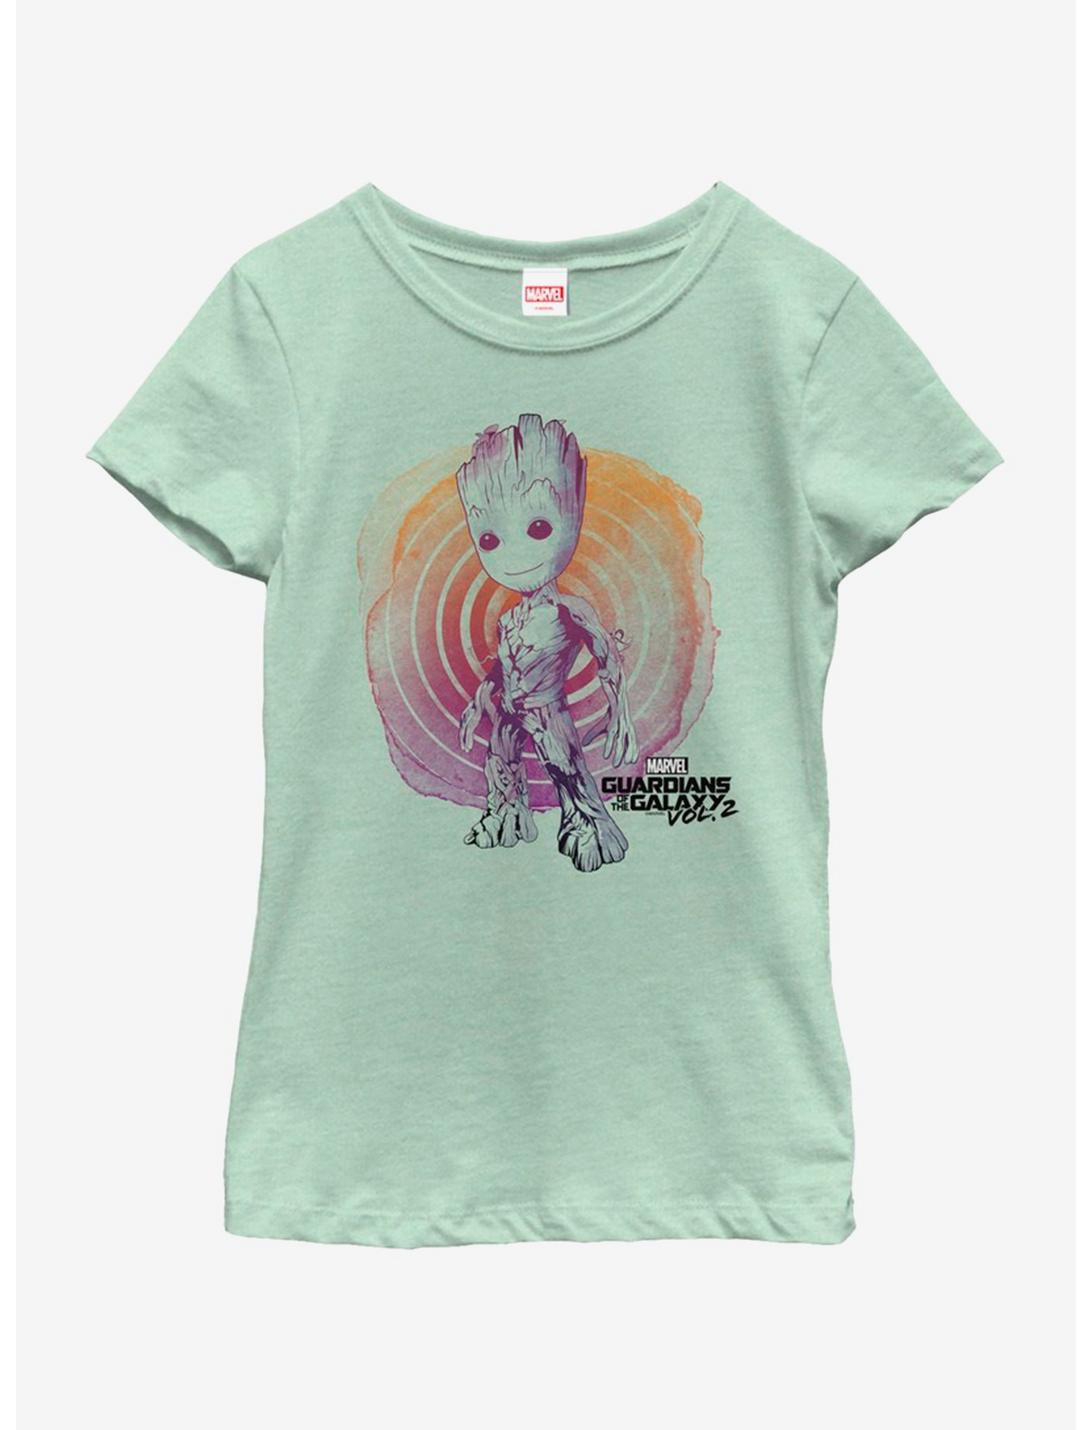 Marvel Guardians of The Galaxy Groot Watercolor Youth Girls T-Shirt, MINT, hi-res